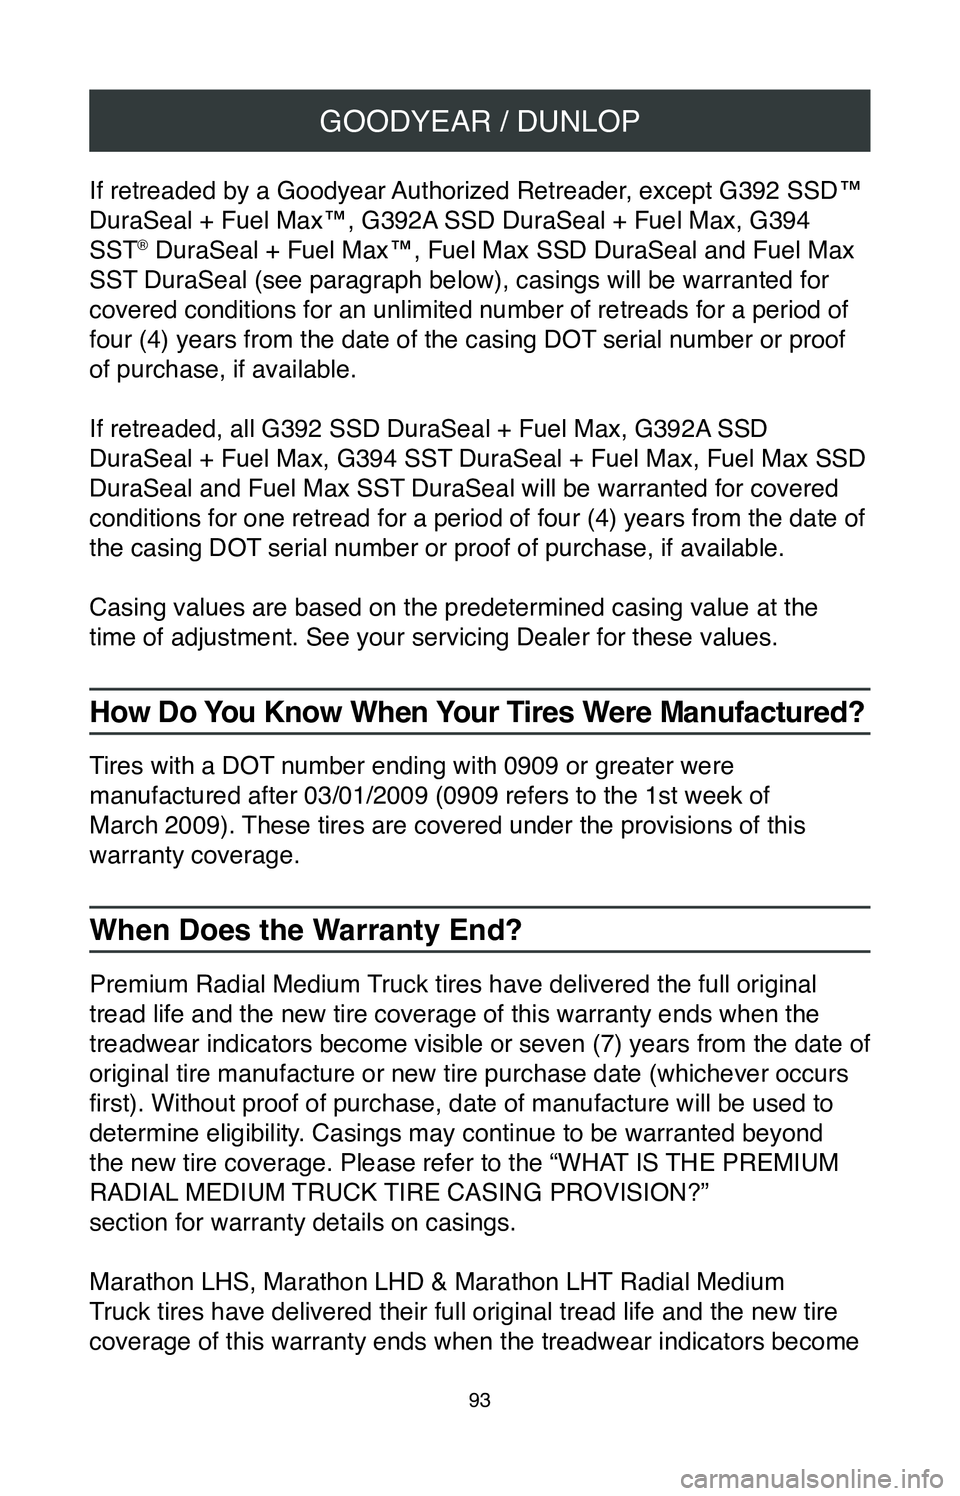 TOYOTA PRIUS 2020  Warranties & Maintenance Guides (in English) GOODYEAR / DUNLOP
93
If retreaded by a Goodyear Authorized Retreader, except G392 SSD™ 
DuraSeal + Fuel Max™, G392A SSD DuraSeal + Fuel Max, G394 
SST
® DuraSeal + Fuel Max™, Fuel Max SSD DuraS